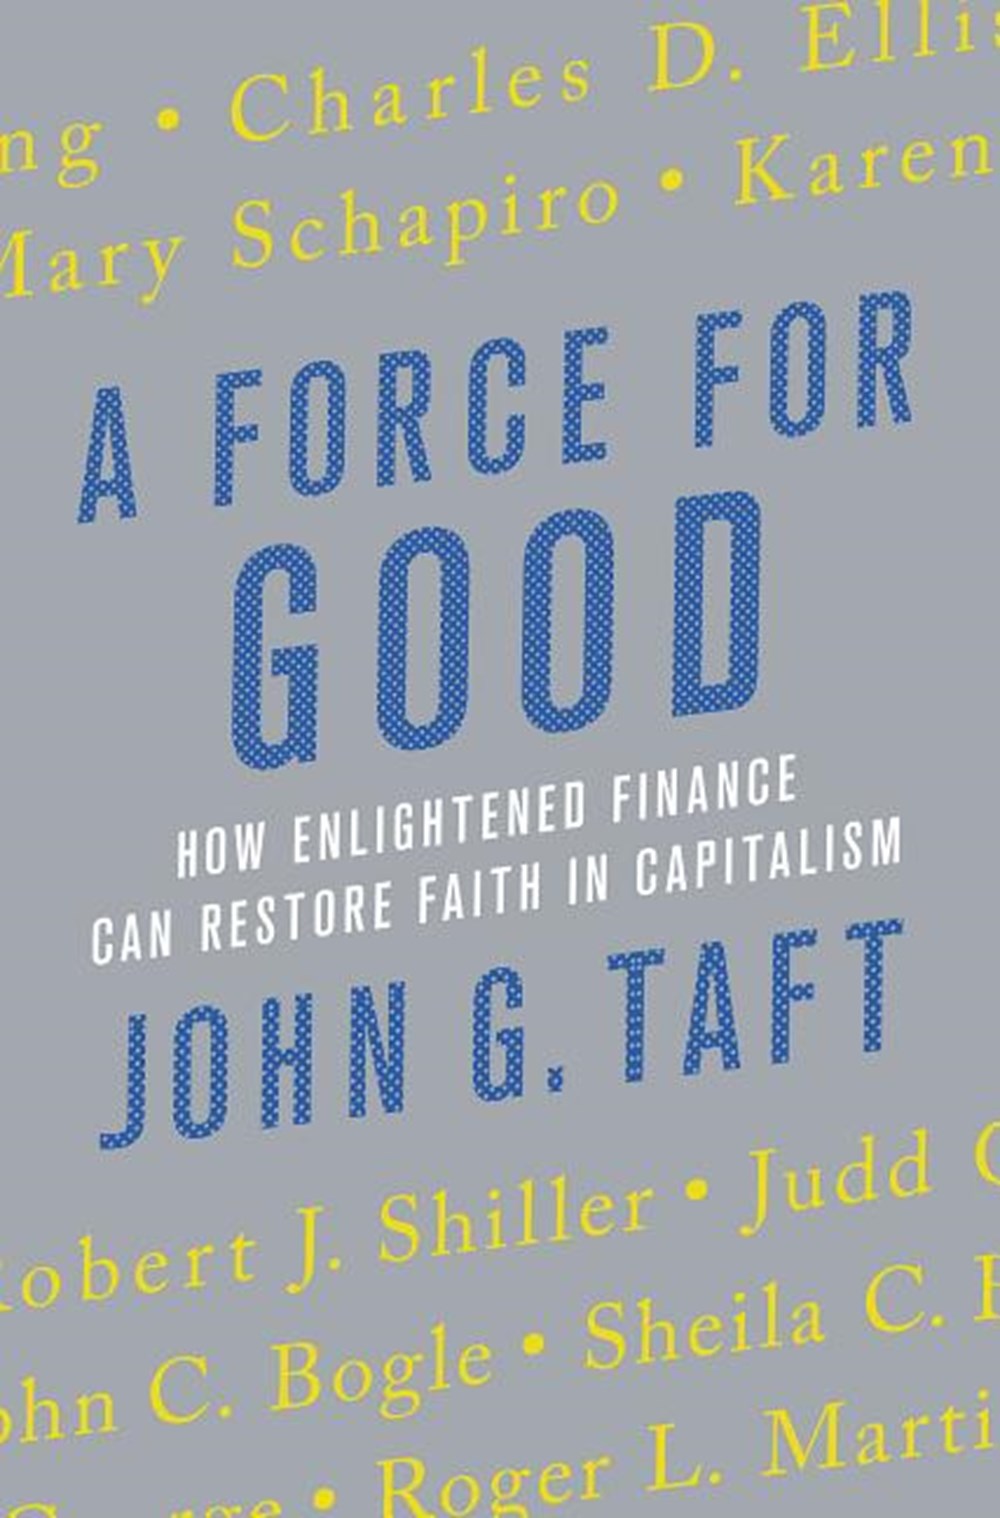 Force for Good: How Enlightened Finance Can Restore Faith in Capitalism